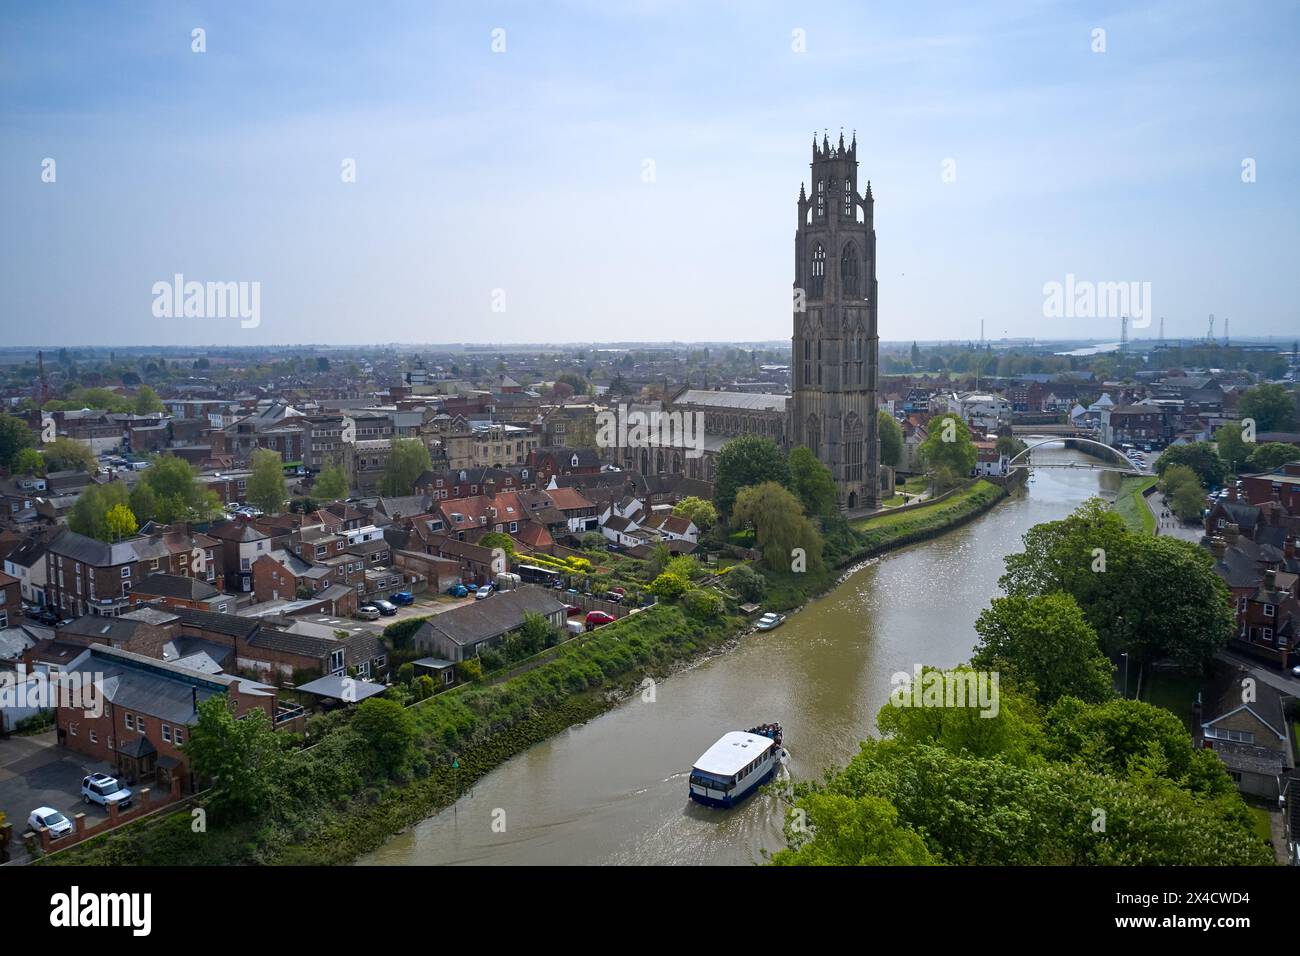 Boston is a market town and inland port in the borough of the same name in the county of Lincolnshire, England.  St Botolph's Church is the Anglican p Stock Photo